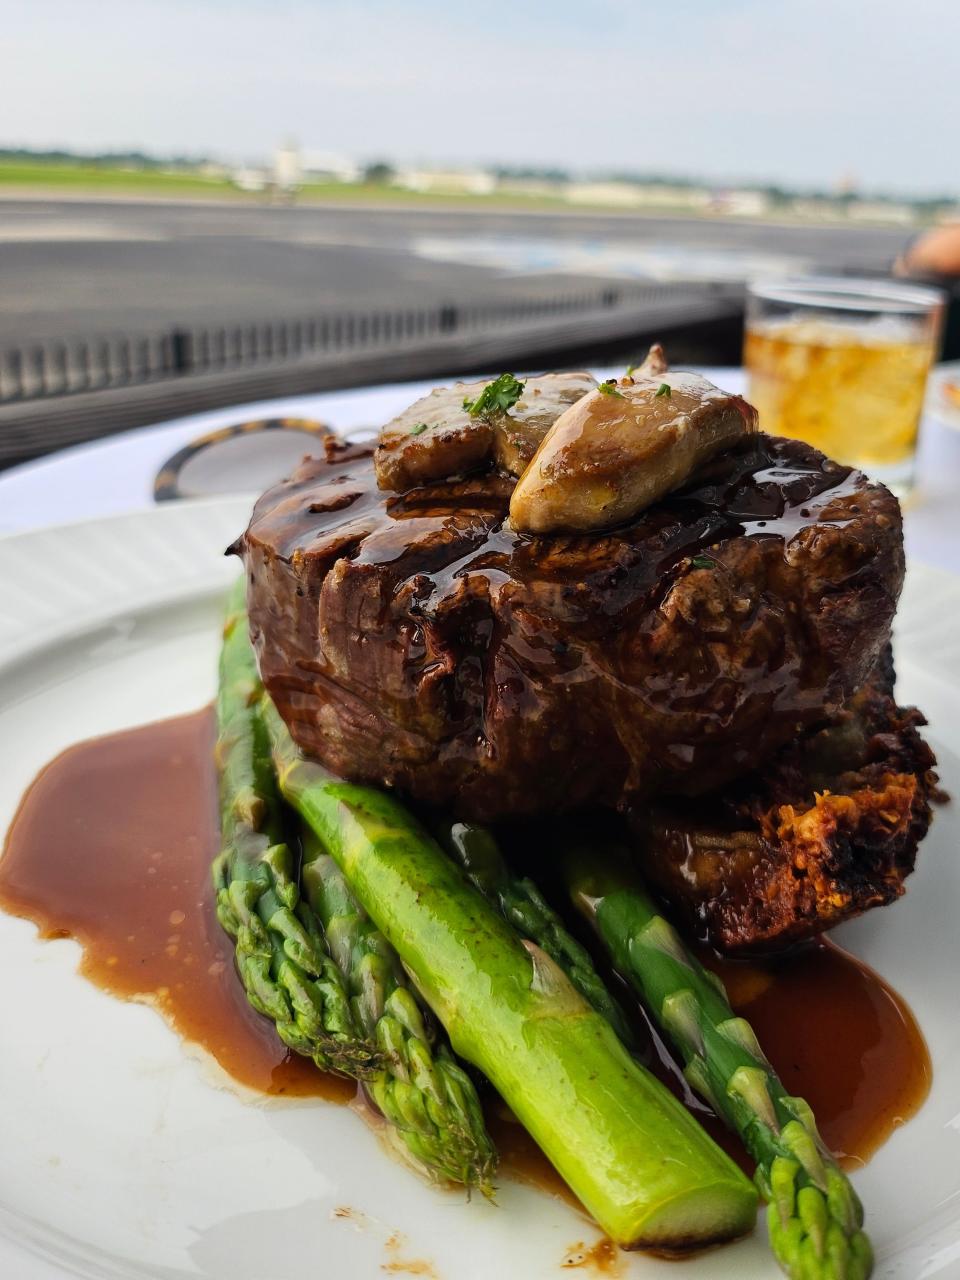 The filet can be topped with foie gras at Bistro Le Relais at Bowman Field airport in Louisville.